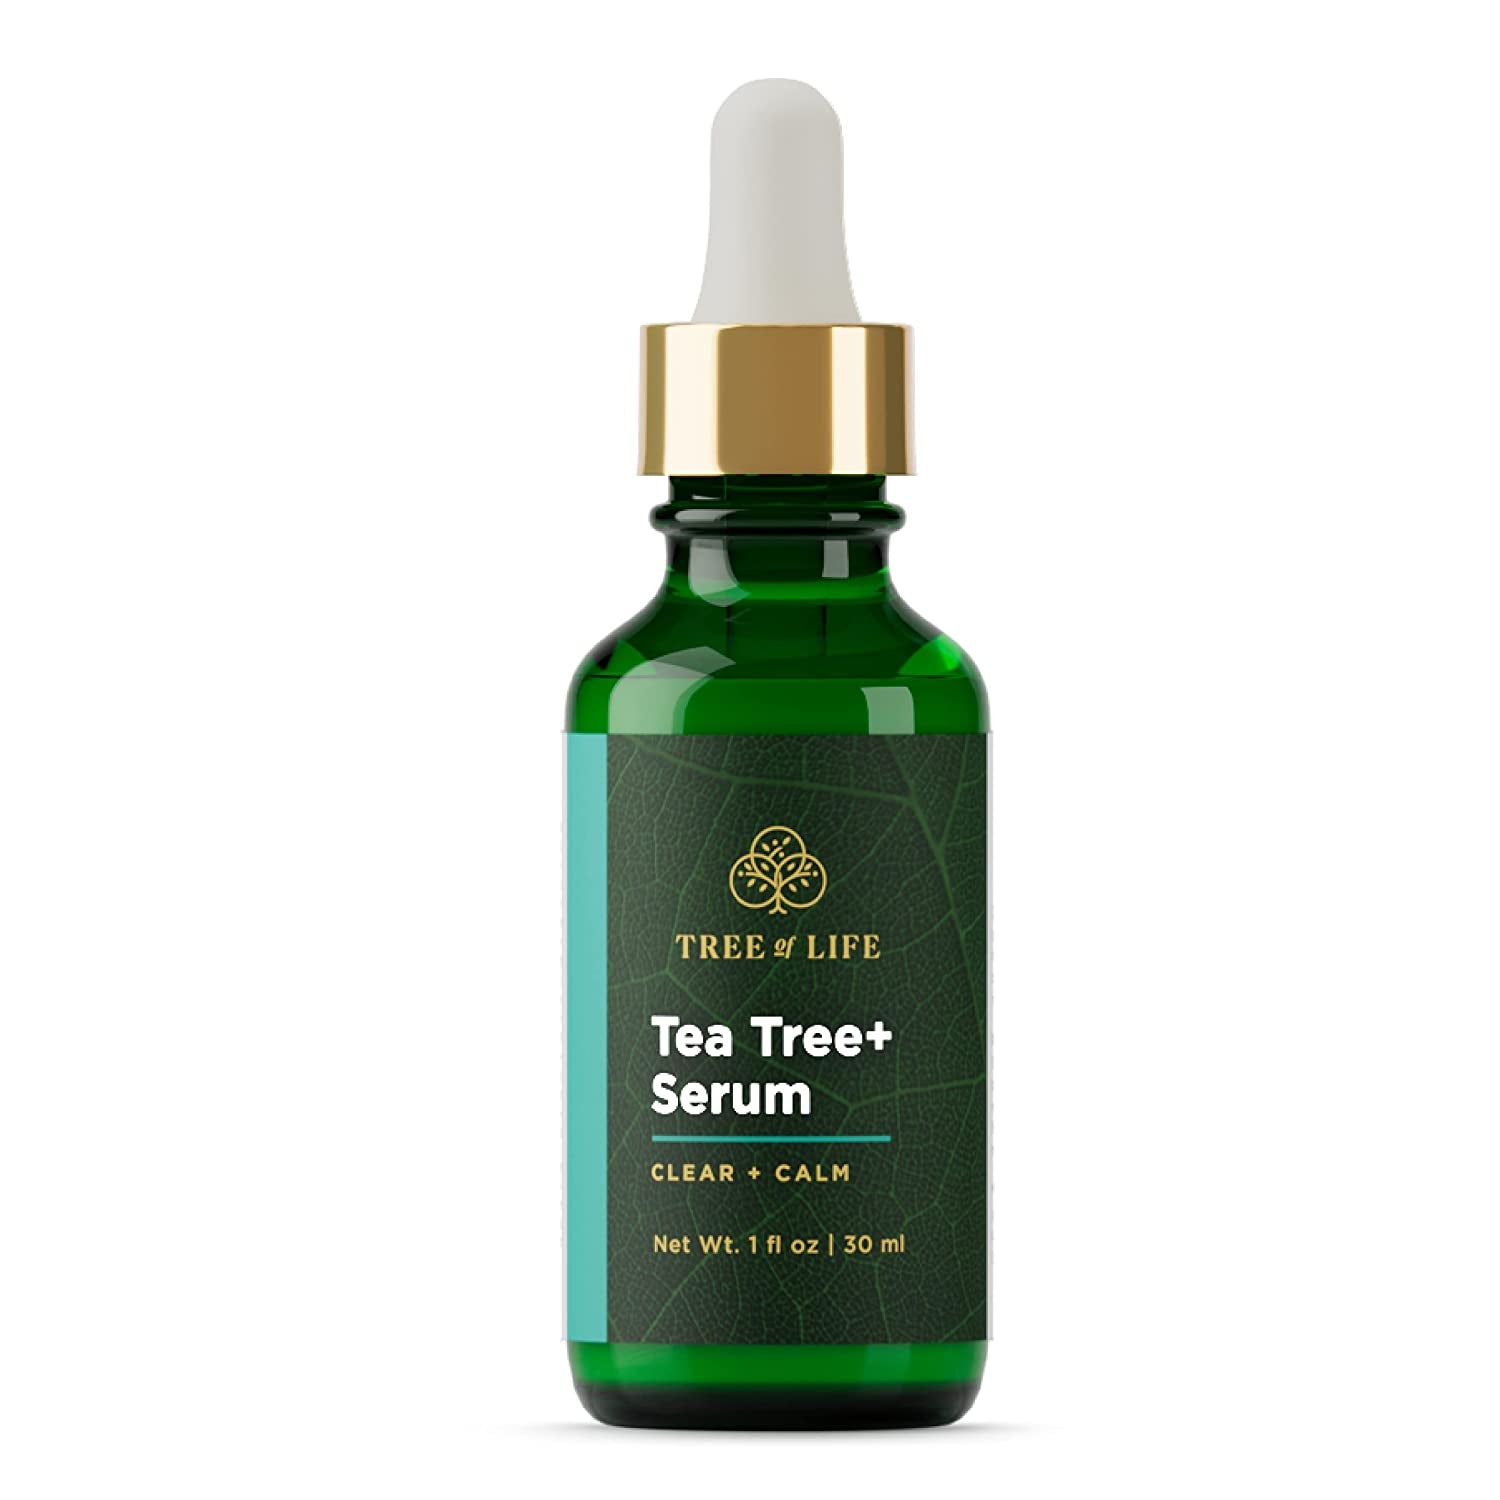 Tree of Life Firming Retinol Serum with Hydrating Hyaluronic Acid for Wrinkles